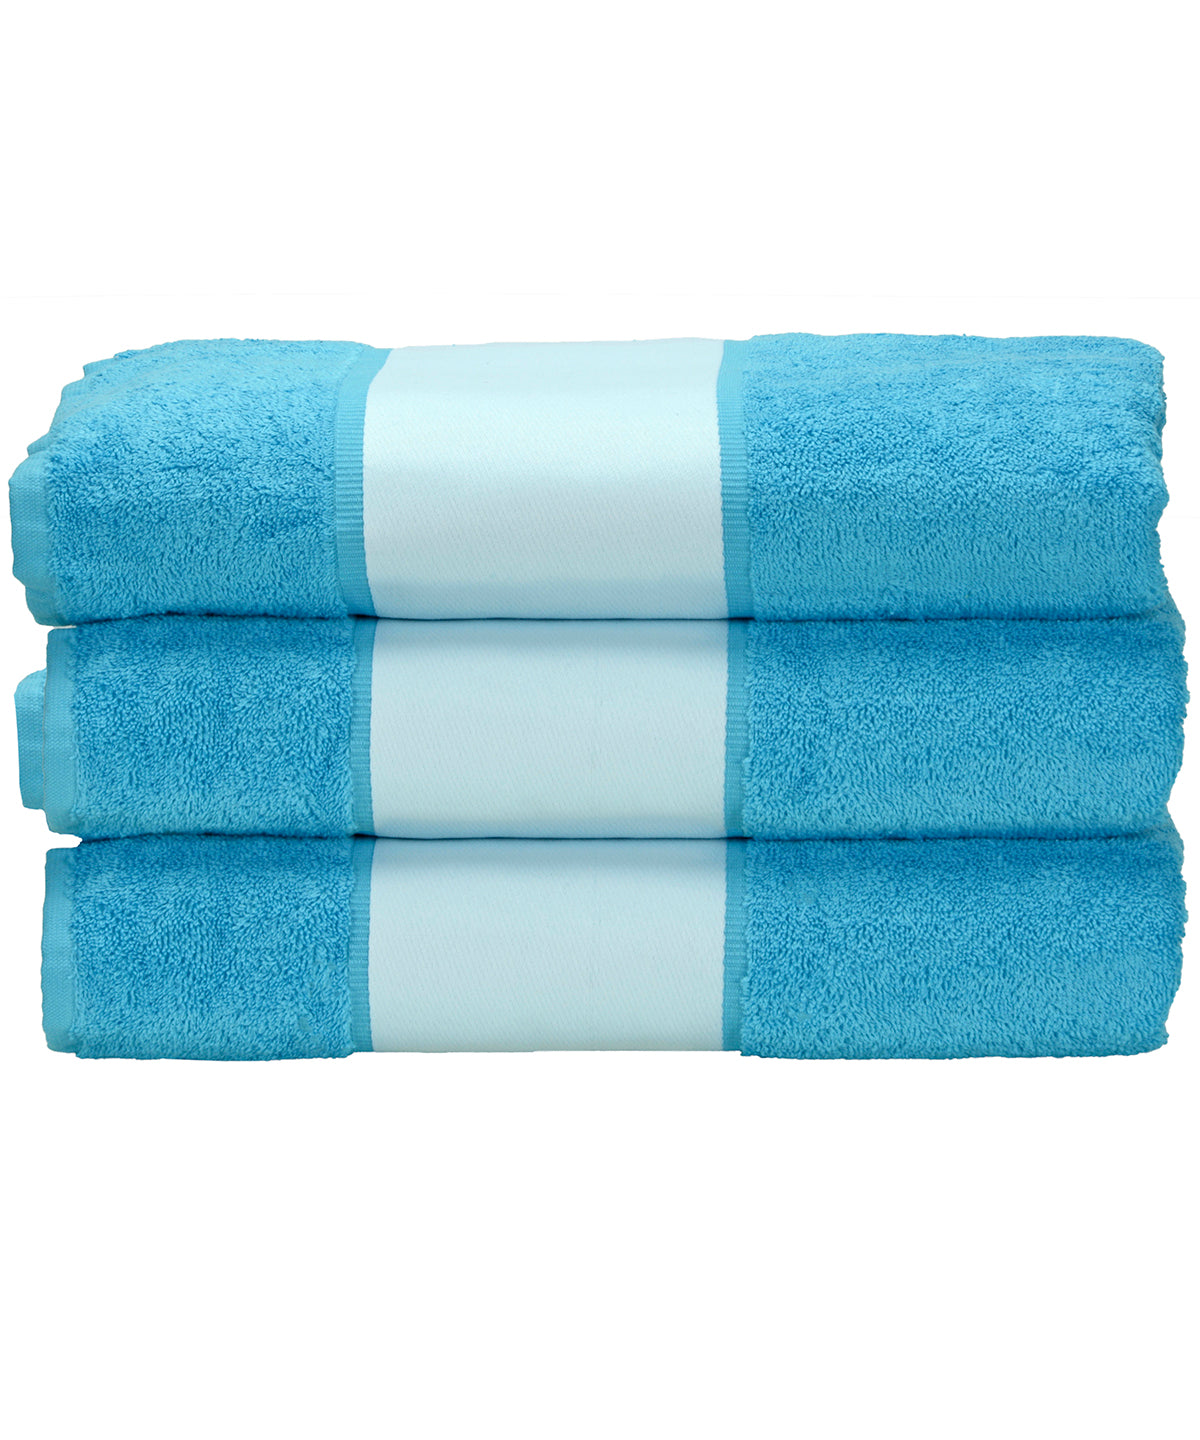 Personalised Towels - Turquoise A&R Towels ARTG® SUBLI-Me® hand towel